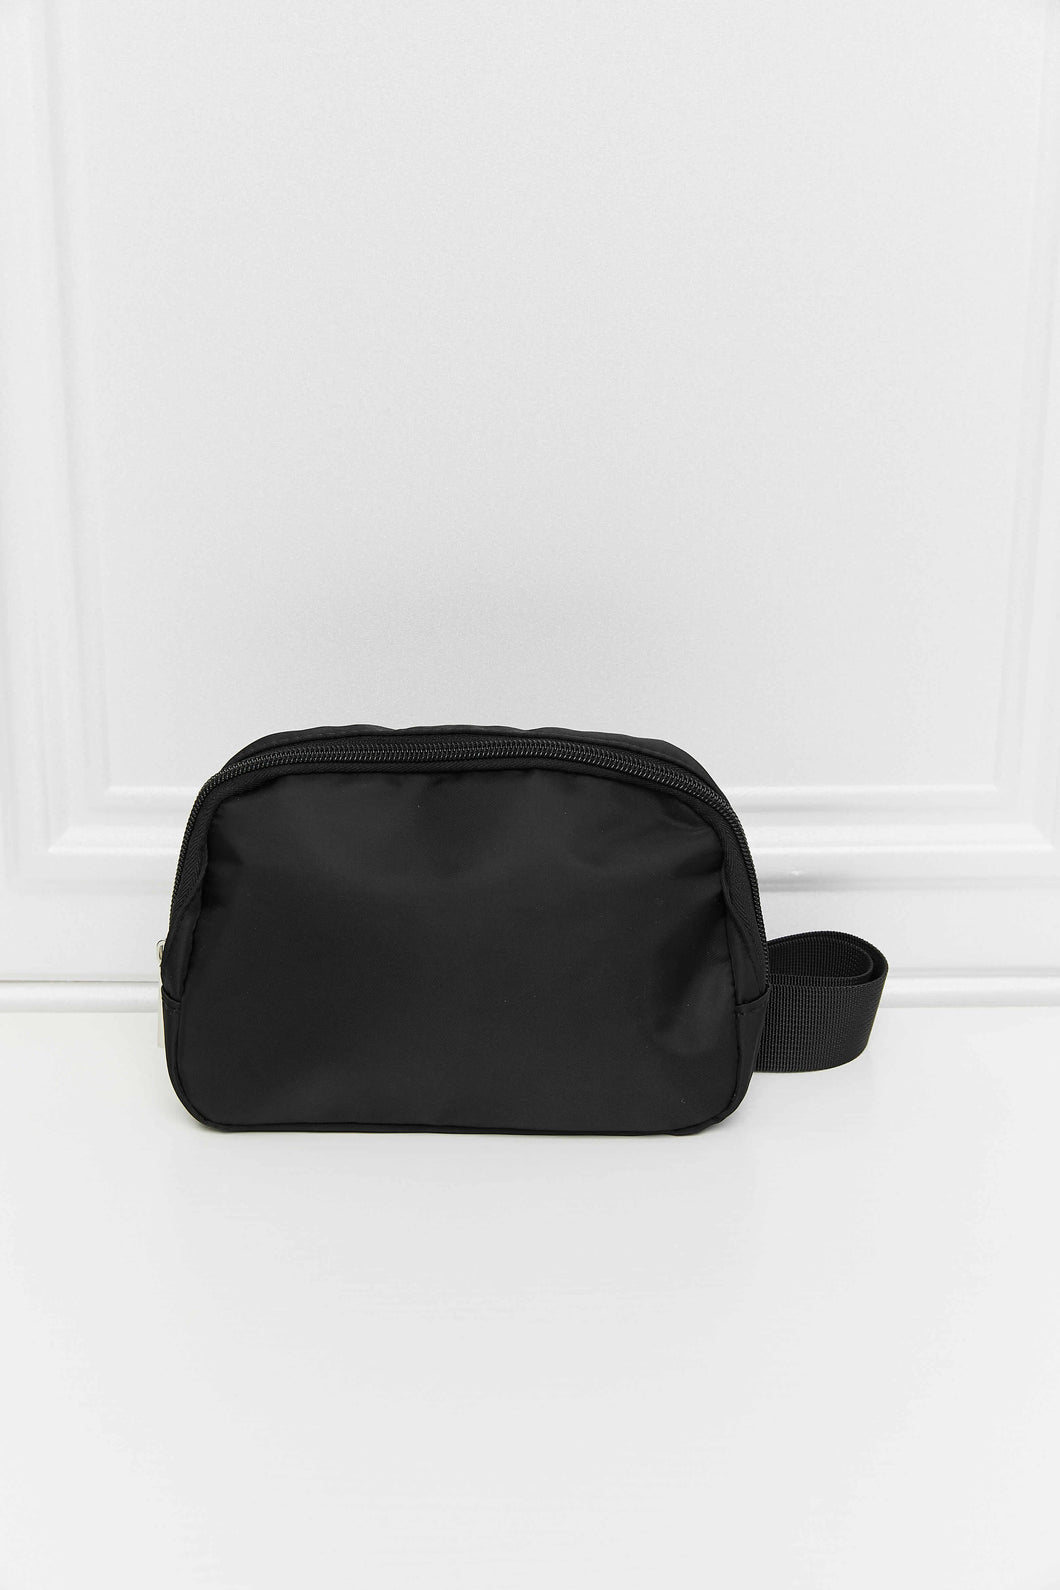 Places To Go Zip Closure Fanny Pack